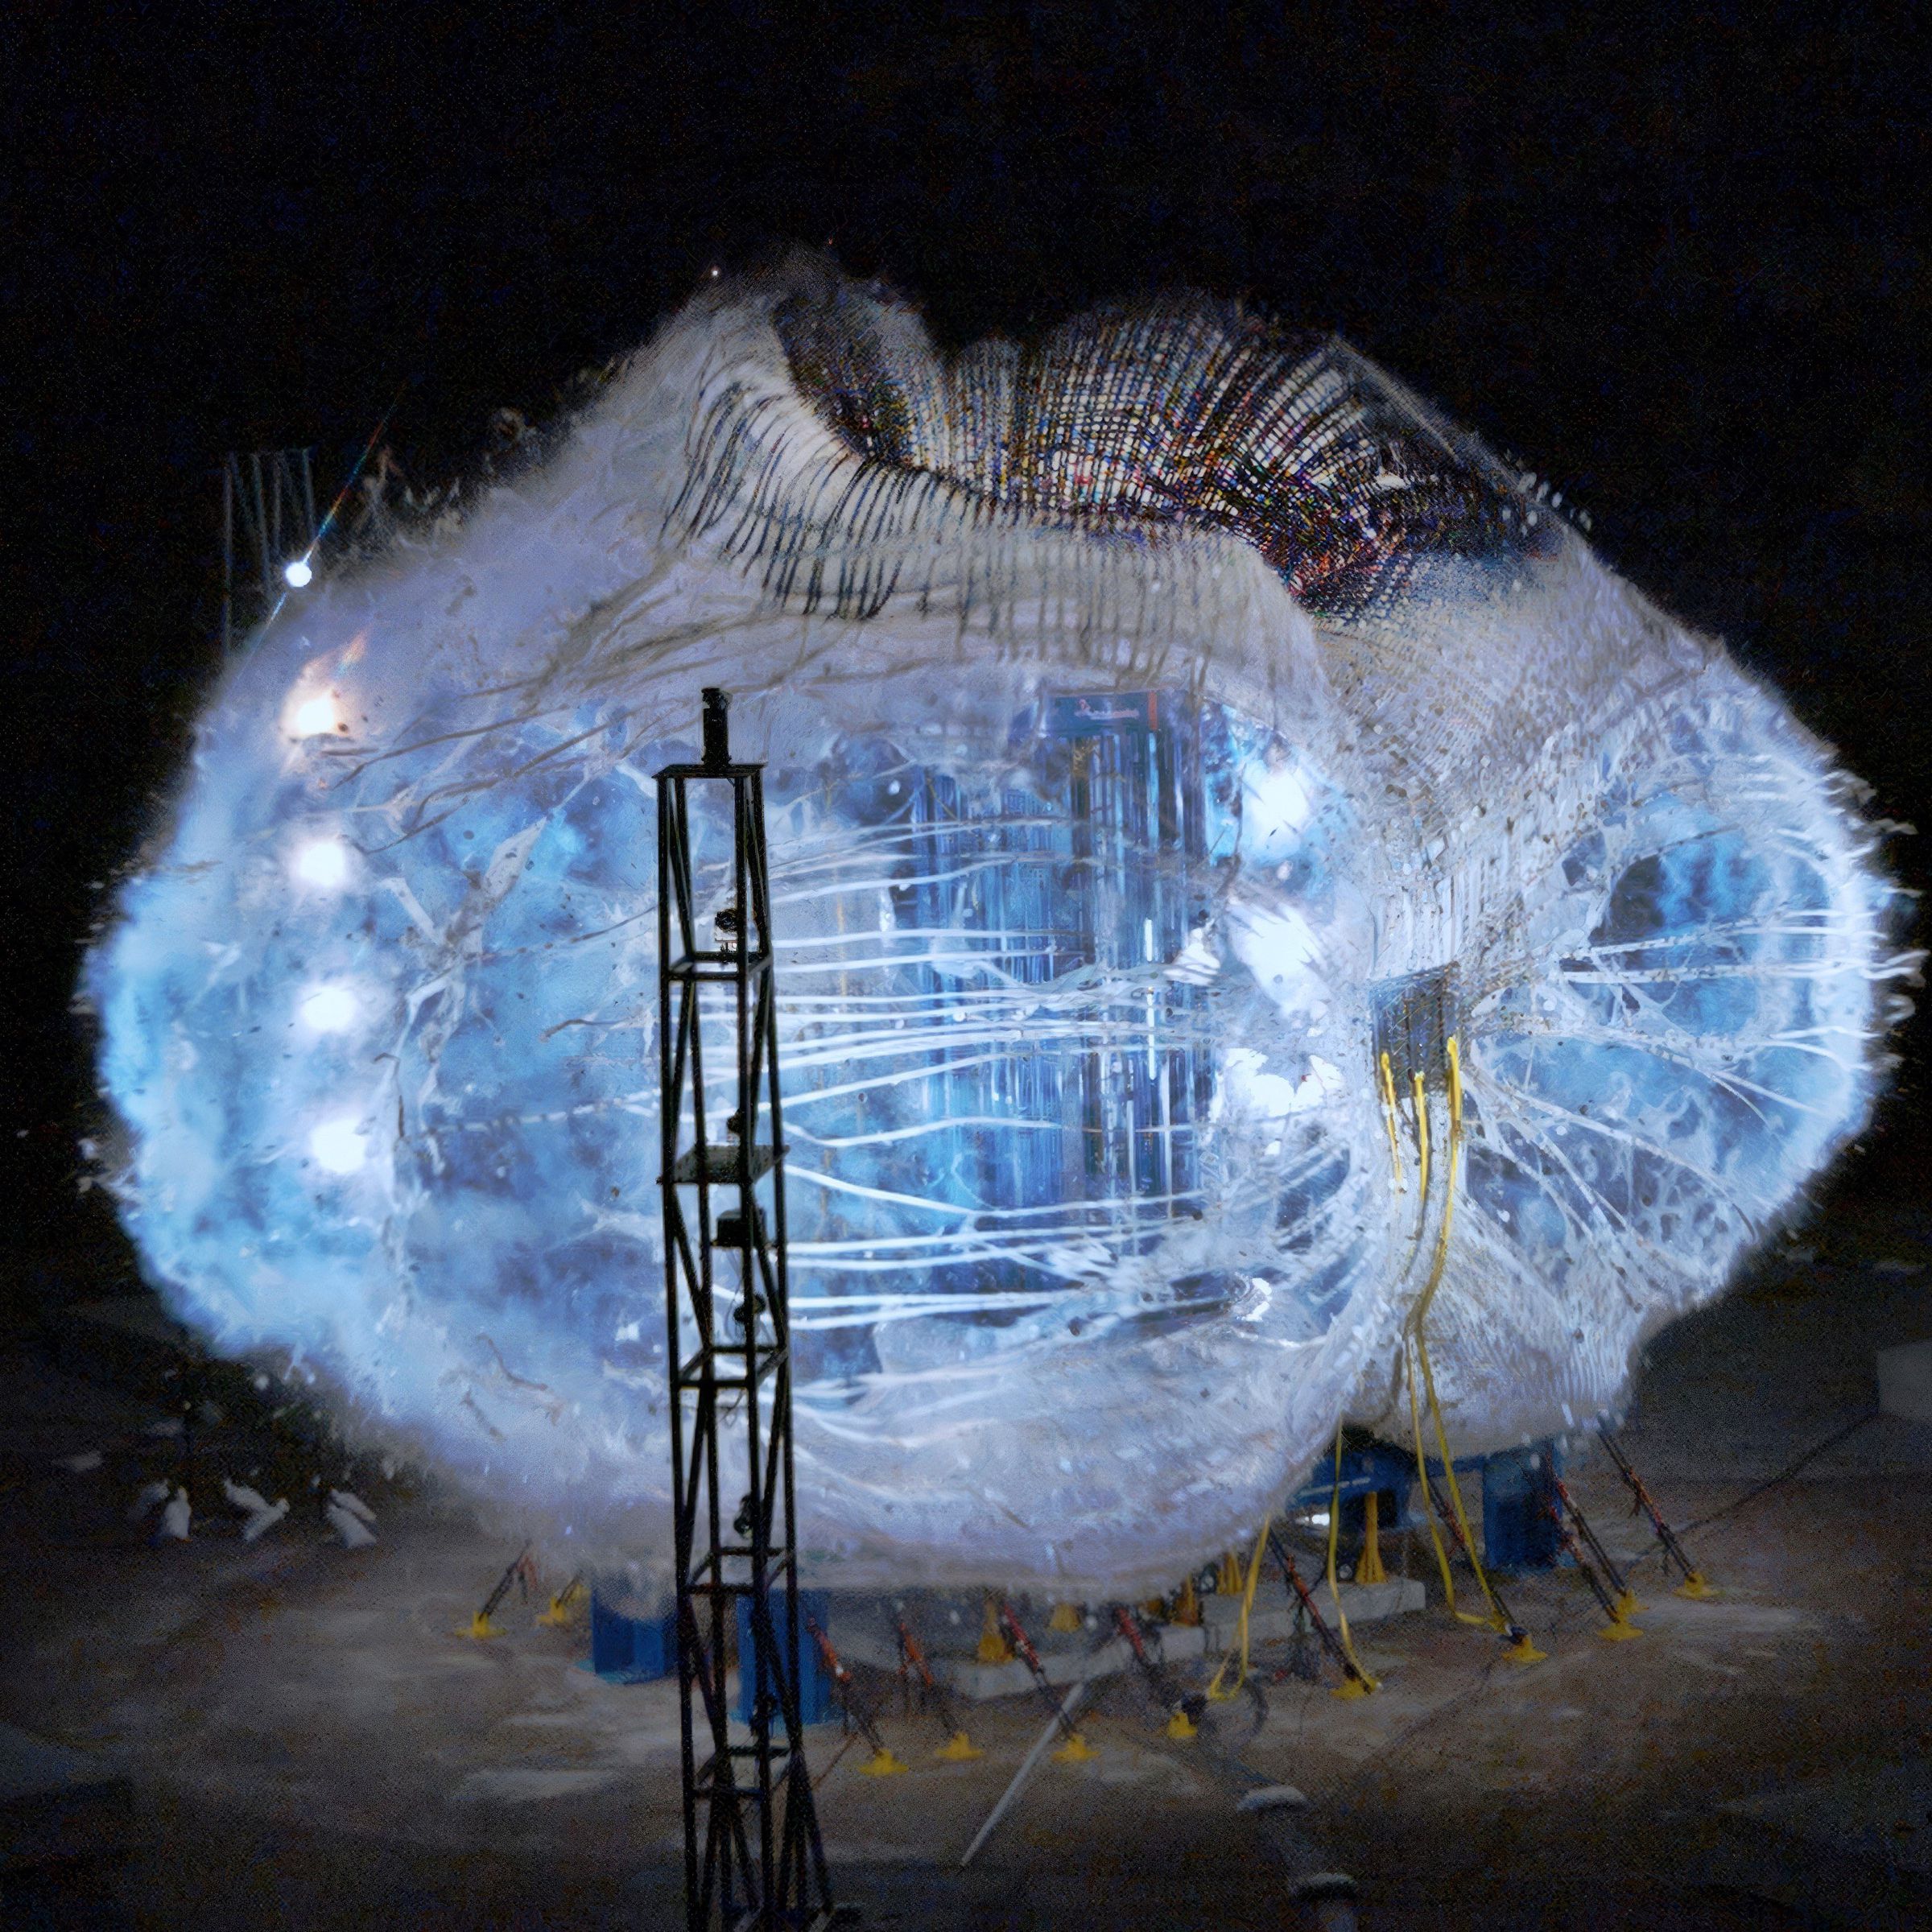 Sierra Space’s inflatable space habitat blows up